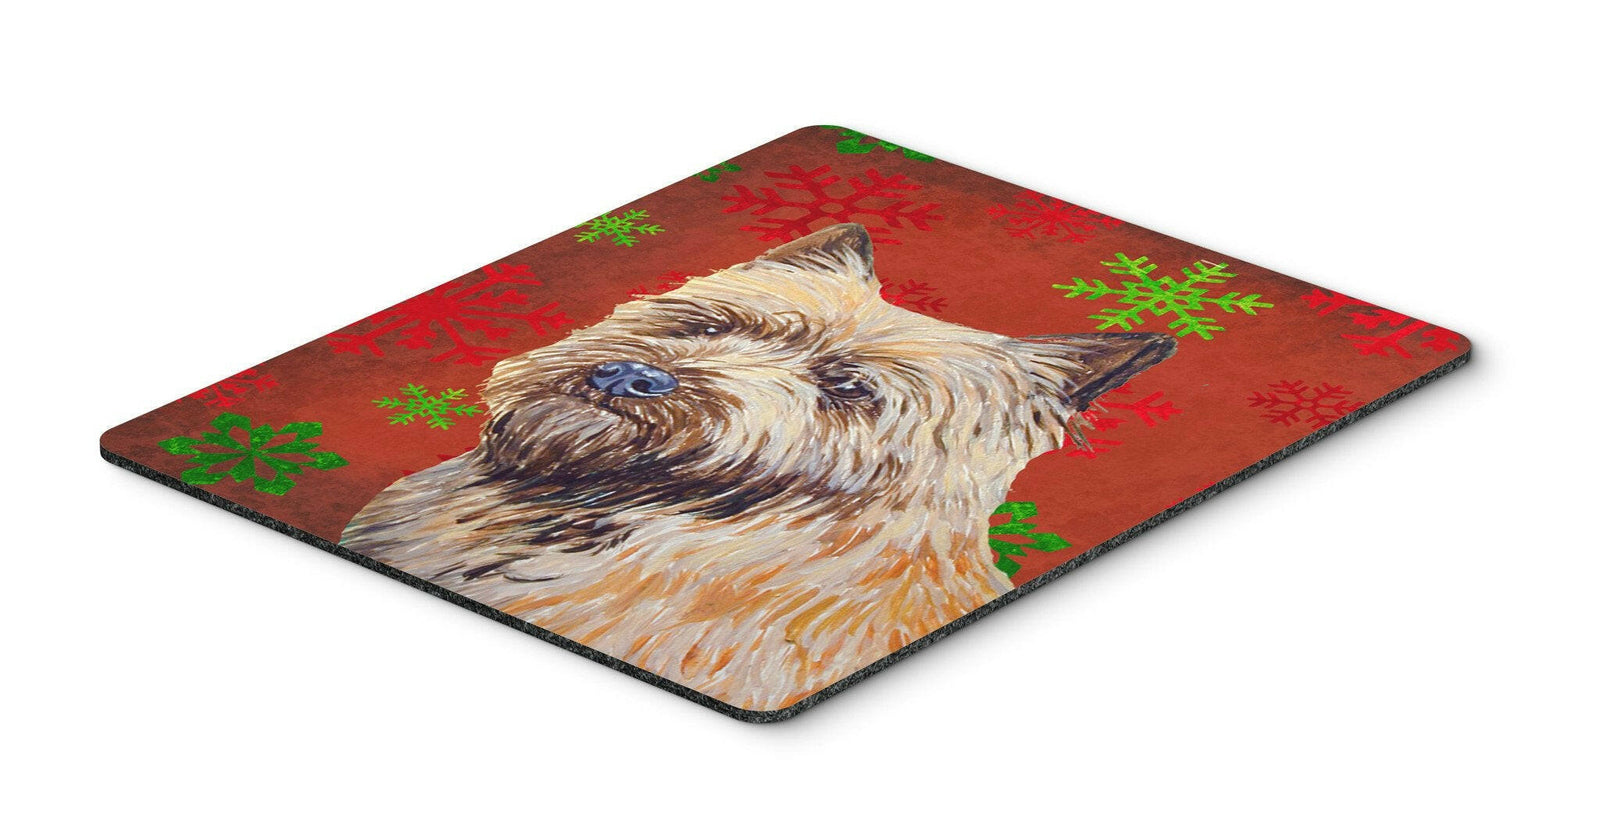 Cairn Terrier Red and Green Snowflakes Christmas Mouse Pad, Hot Pad or Trivet by Caroline's Treasures